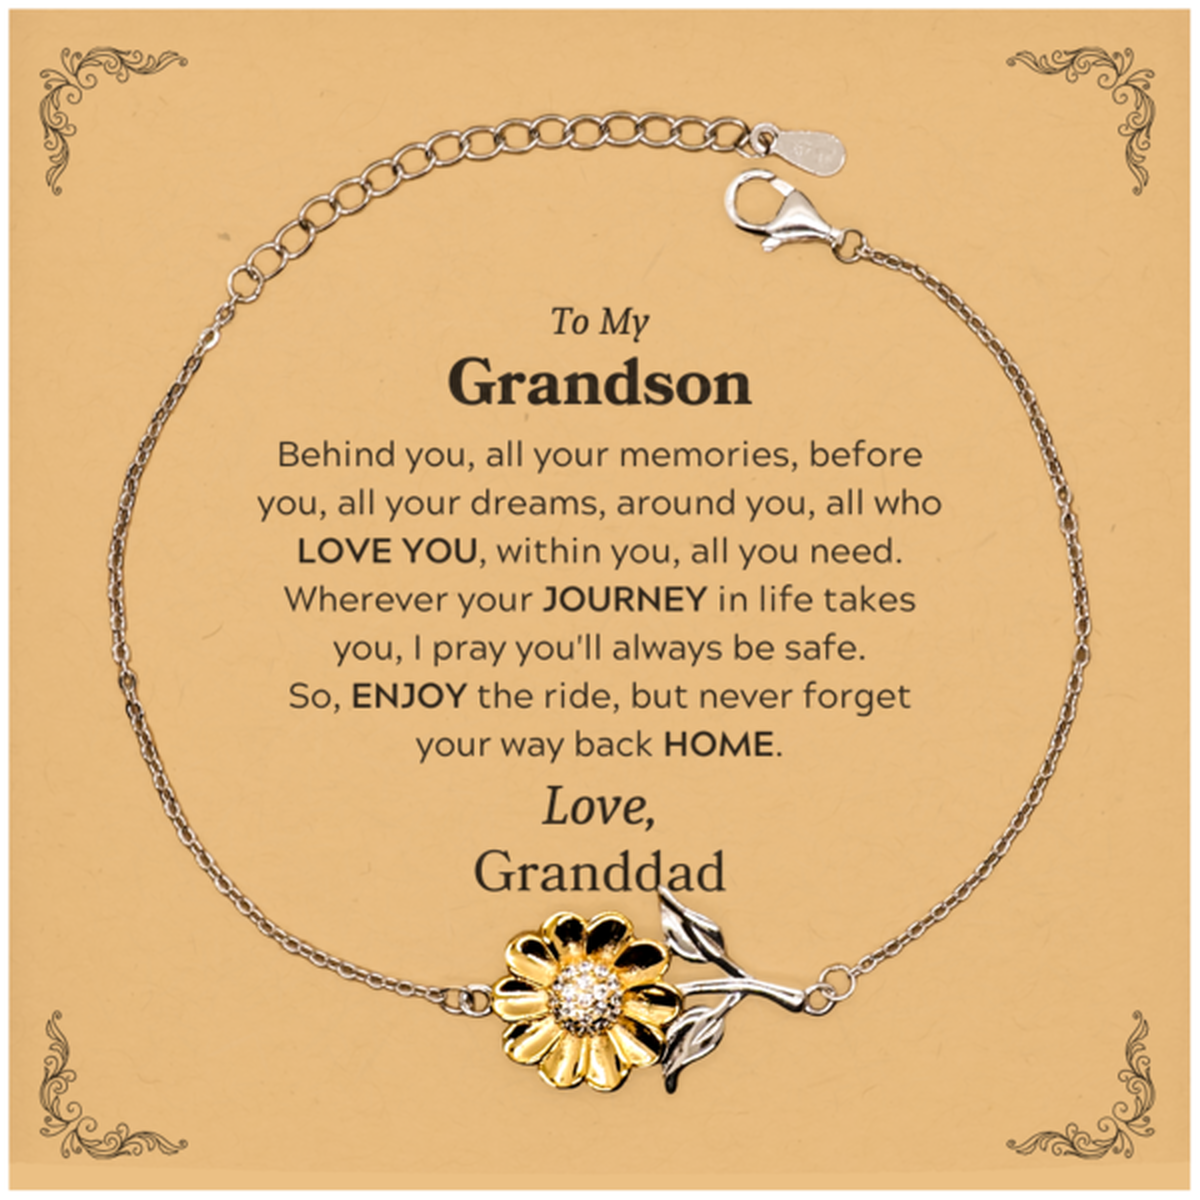 To My Grandson Graduation Gifts from Granddad, Grandson Sunflower Bracelet Christmas Birthday Gifts for Grandson Behind you, all your memories, before you, all your dreams. Love, Granddad